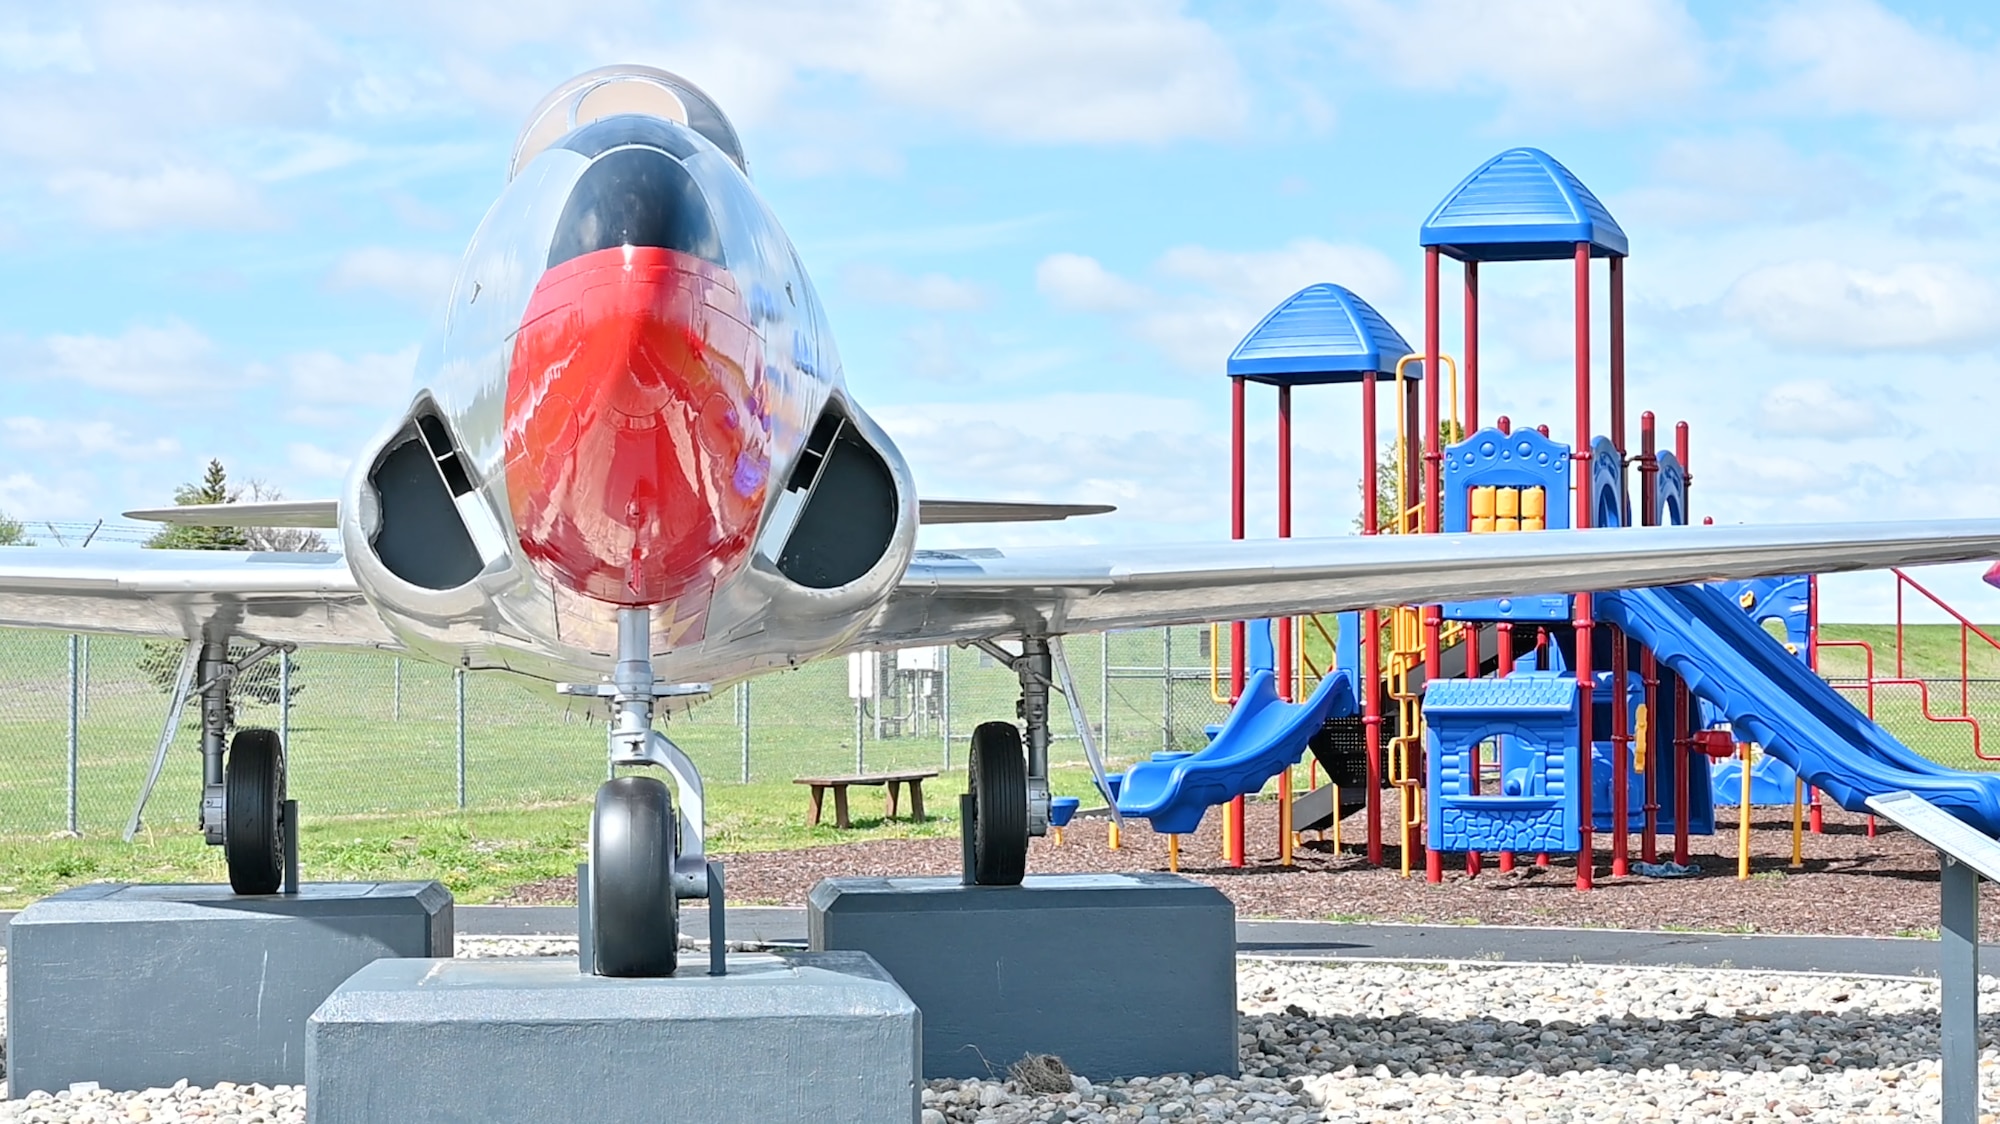 Heritage Park, adjacent to the Fort Wayne International Airport, is a private park open to the public to showcase all of the aircraft flown by the 122nd Fighter Wing, Indiana Air National Guard since 1947.